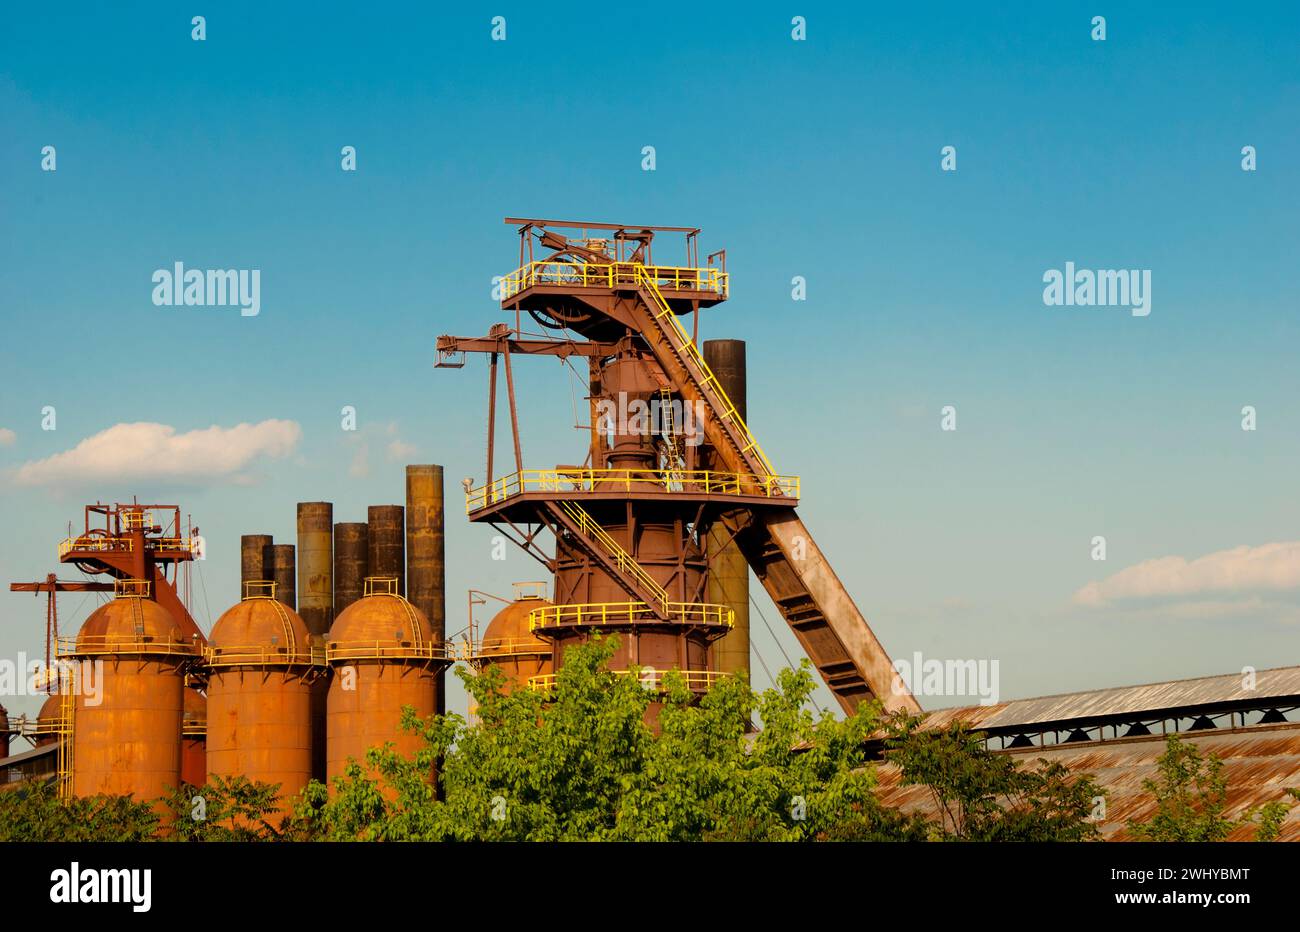 Sloss Furnaces National Historic Landmark - considered birthplace of the city - built in 1882 and produced steel for 90 years - Birmingham, Alabama Stock Photo